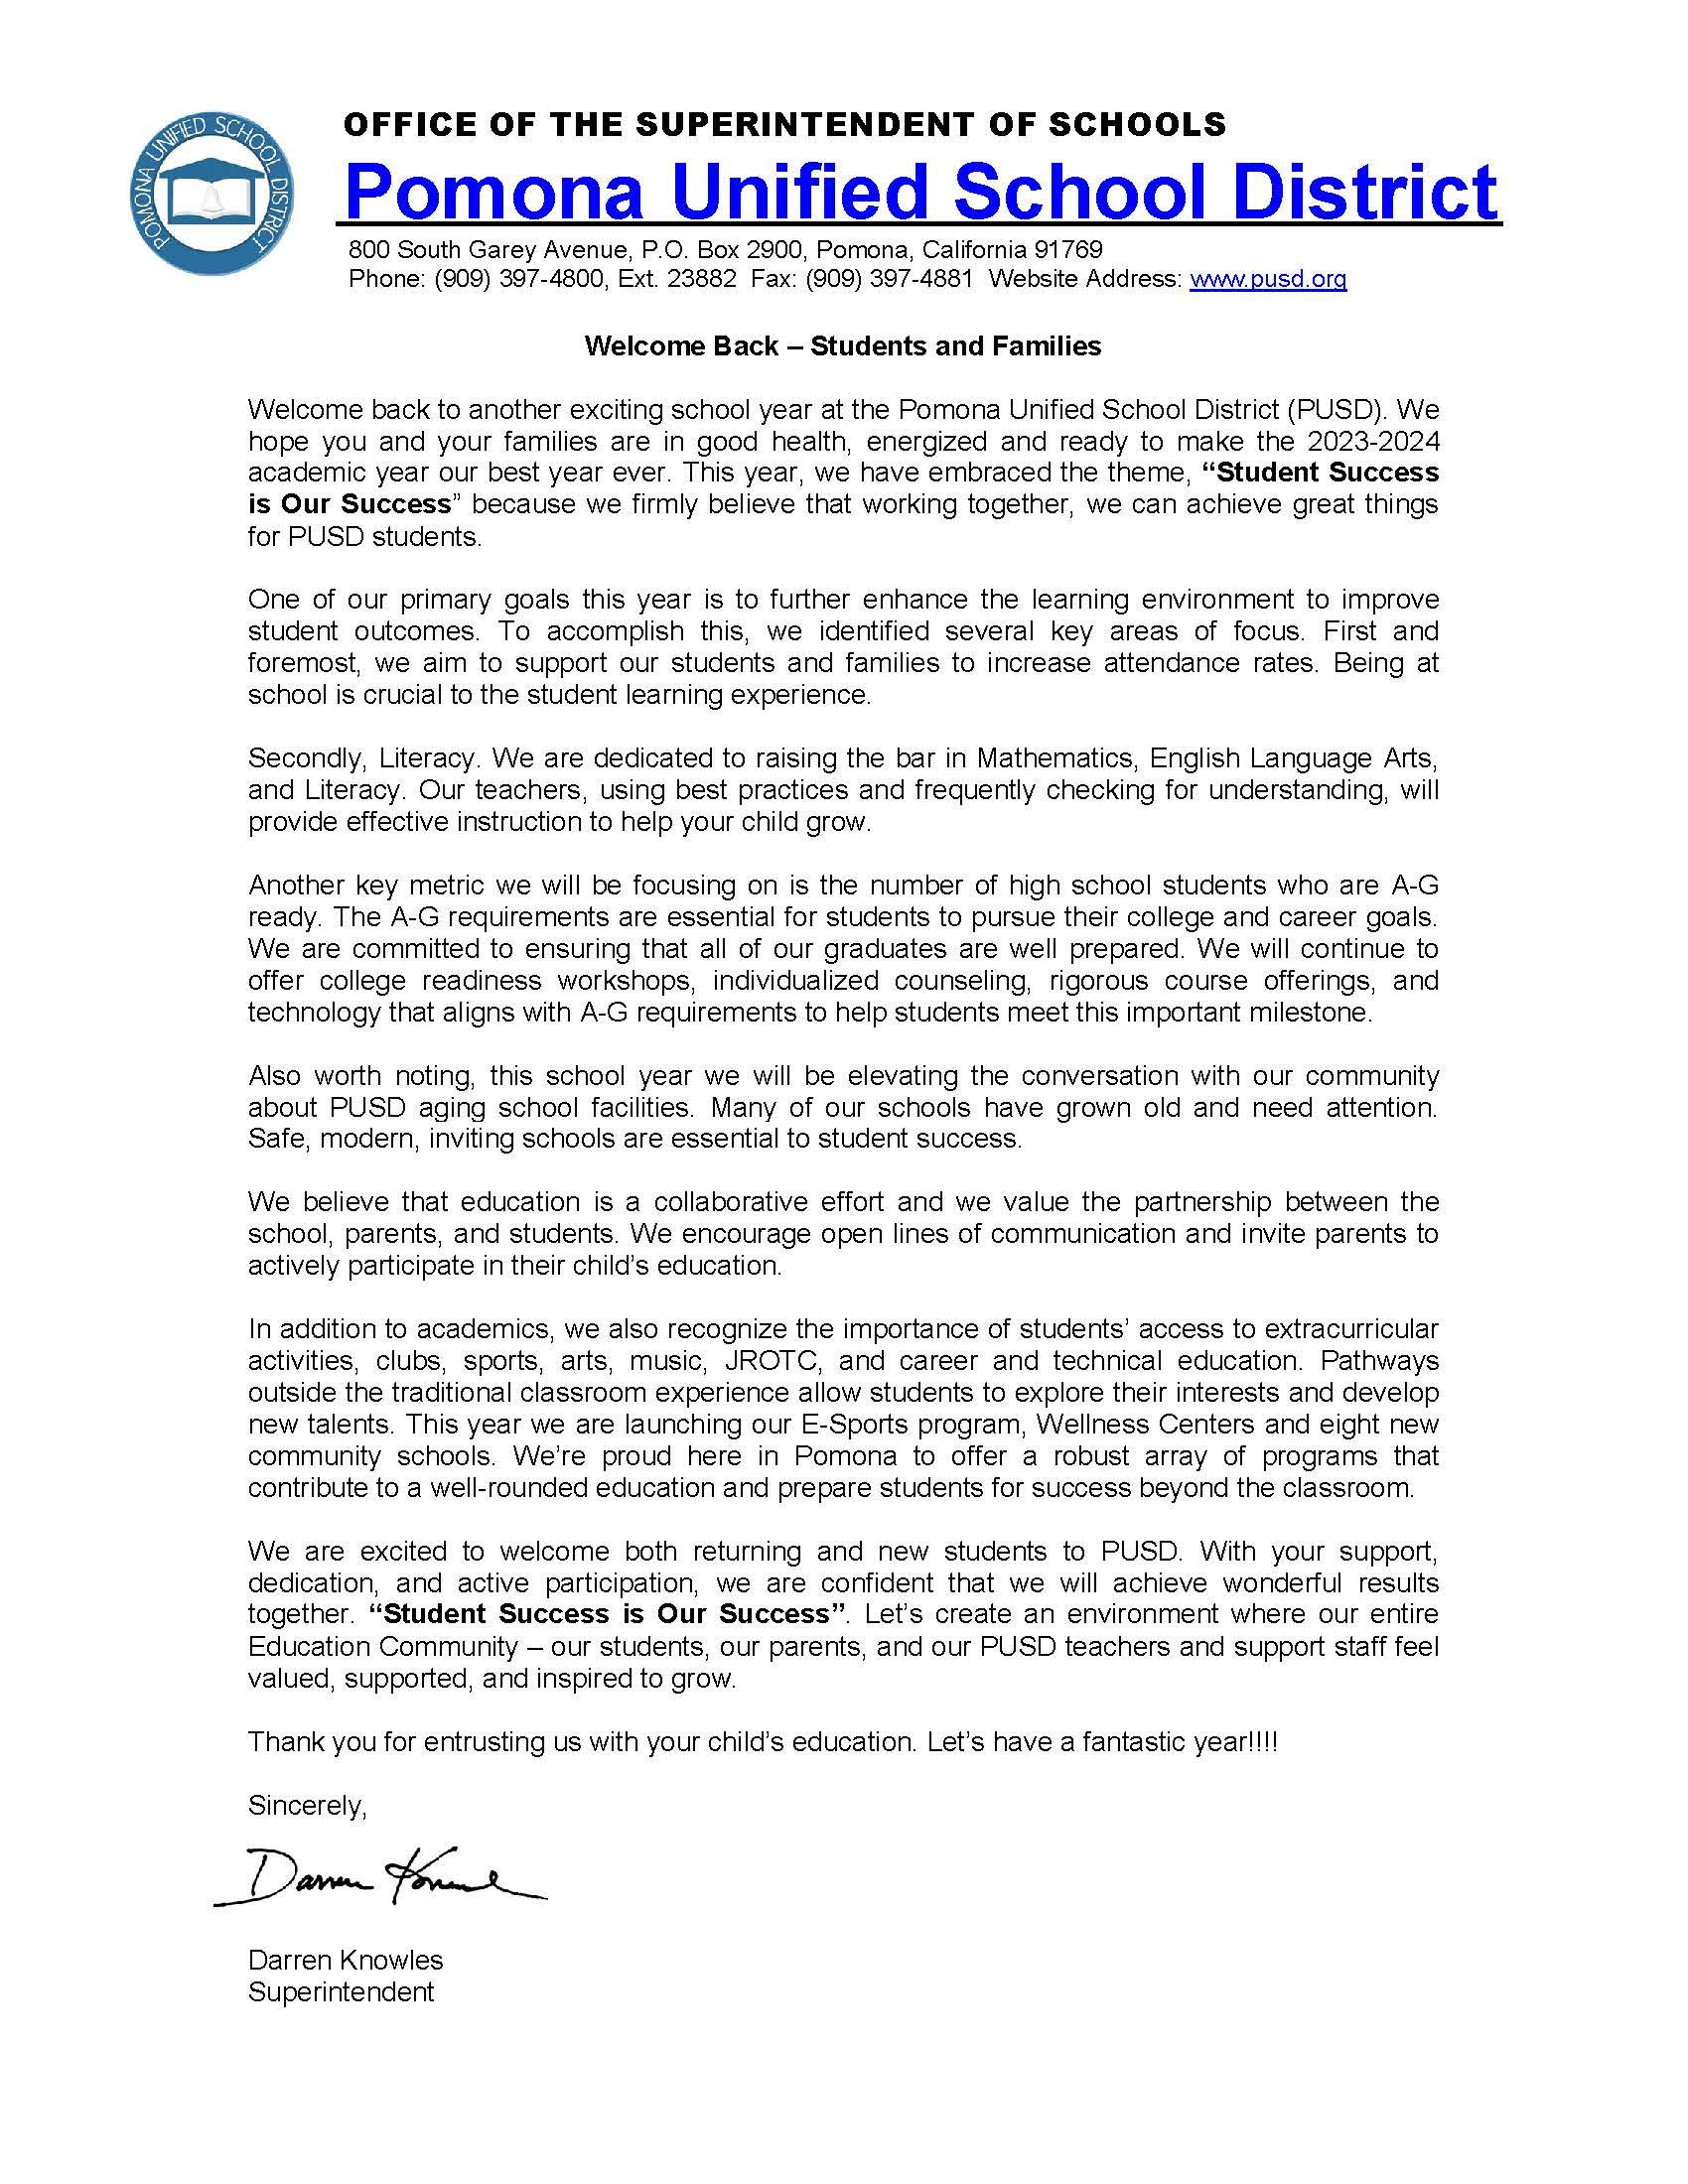 Welcome Back Letter from Superintendent - ENG